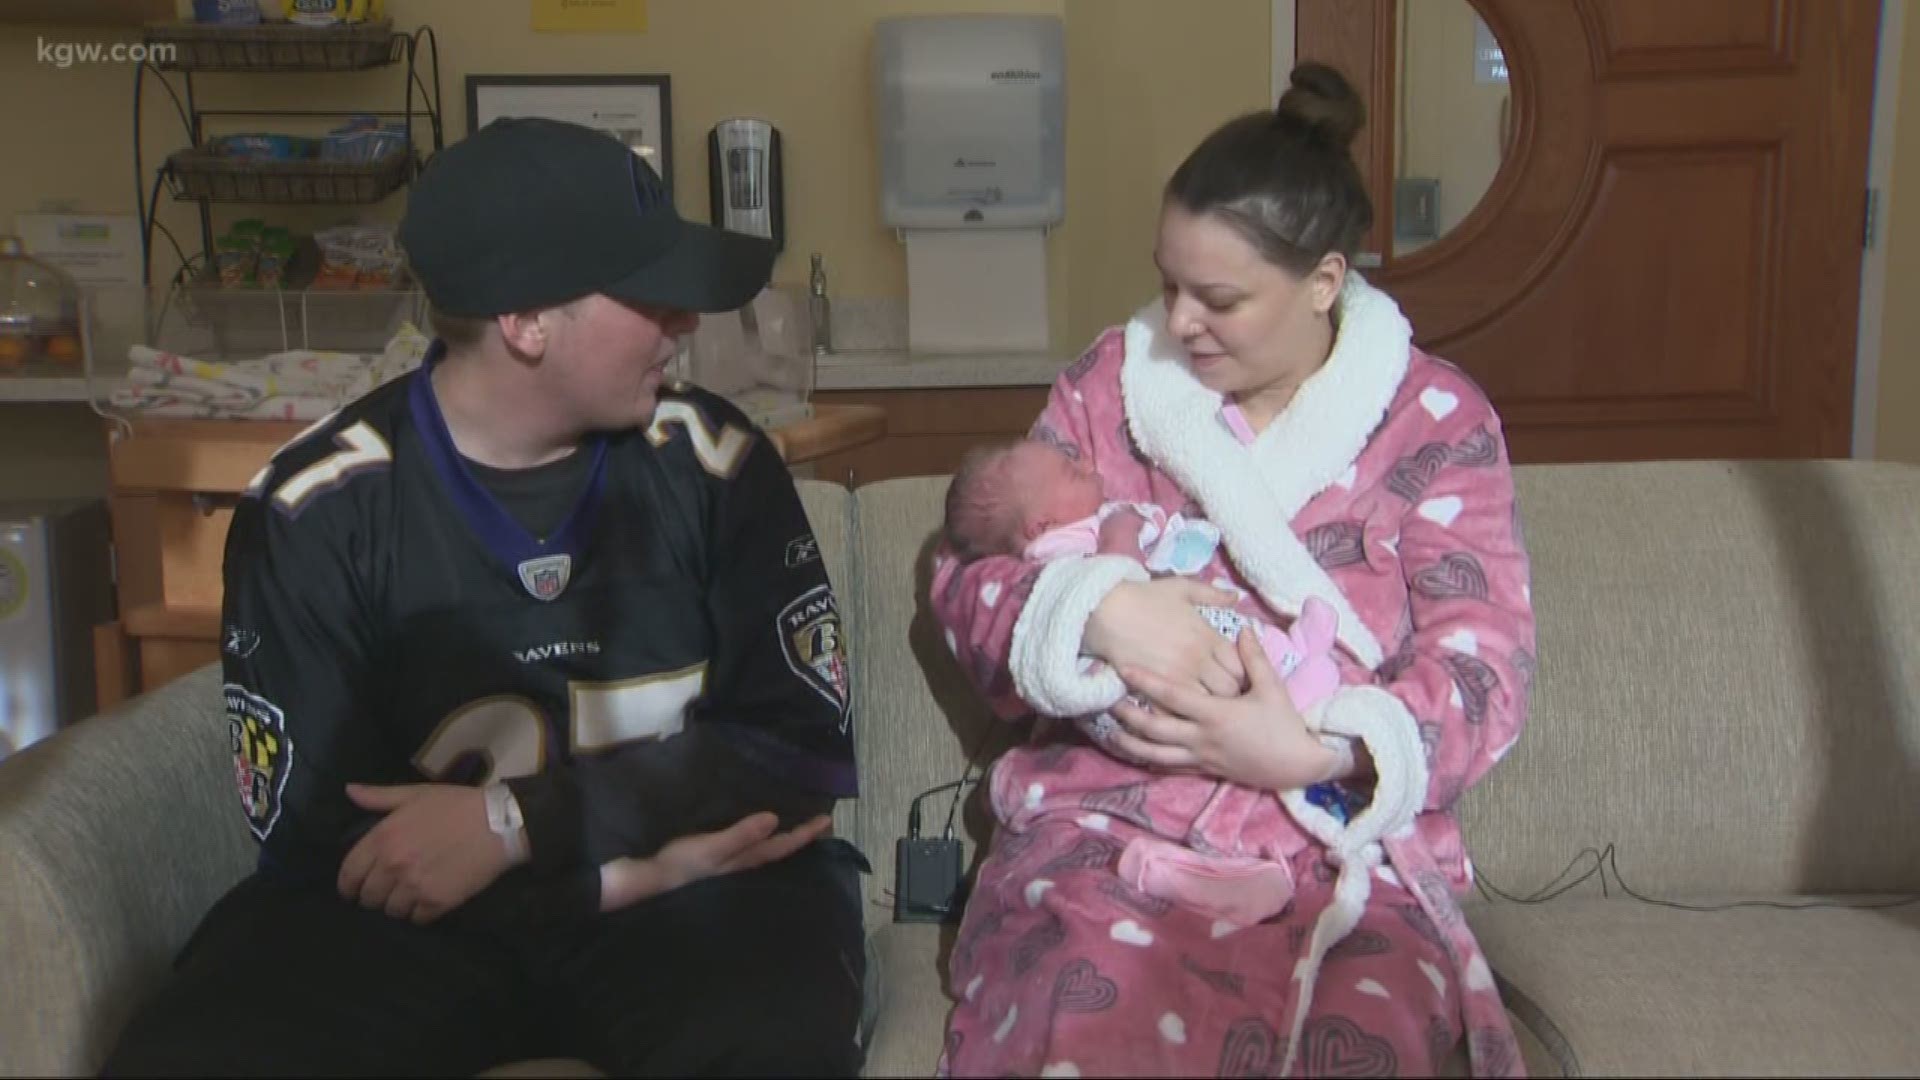 Harmony Faith Neil was born just before 1 a.m. at Providence Saint Vincent Medical Center on New Year’s Day.